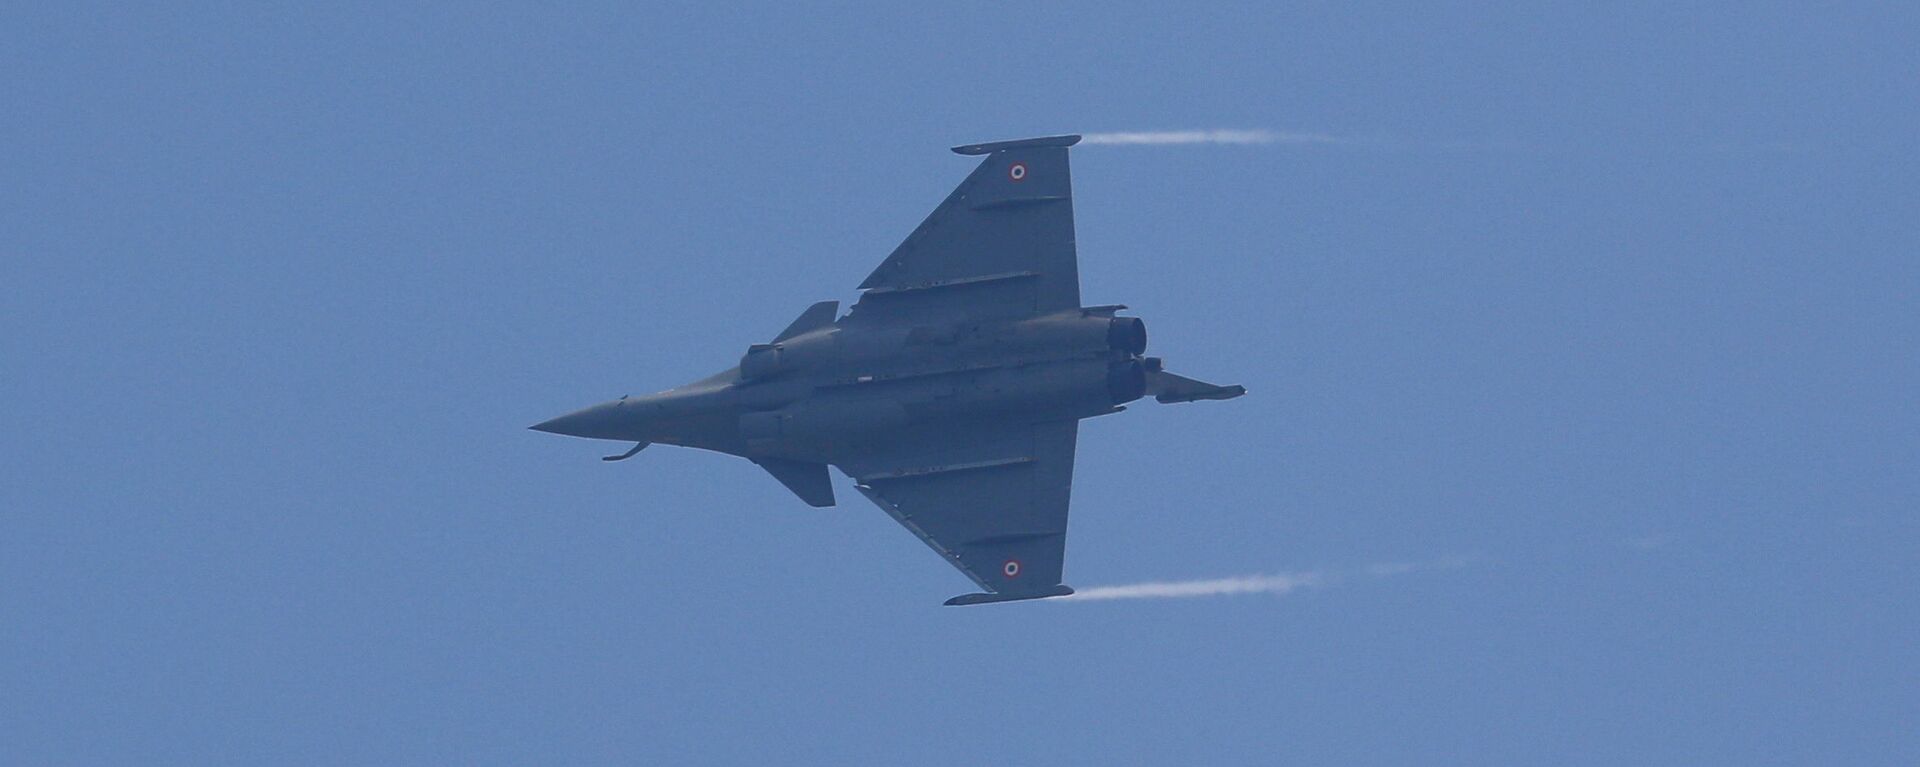 A Rafale fighter jet flies during its induction ceremony at an air force station in Ambala, India, September 10, 2020.  - Sputnik International, 1920, 06.10.2020